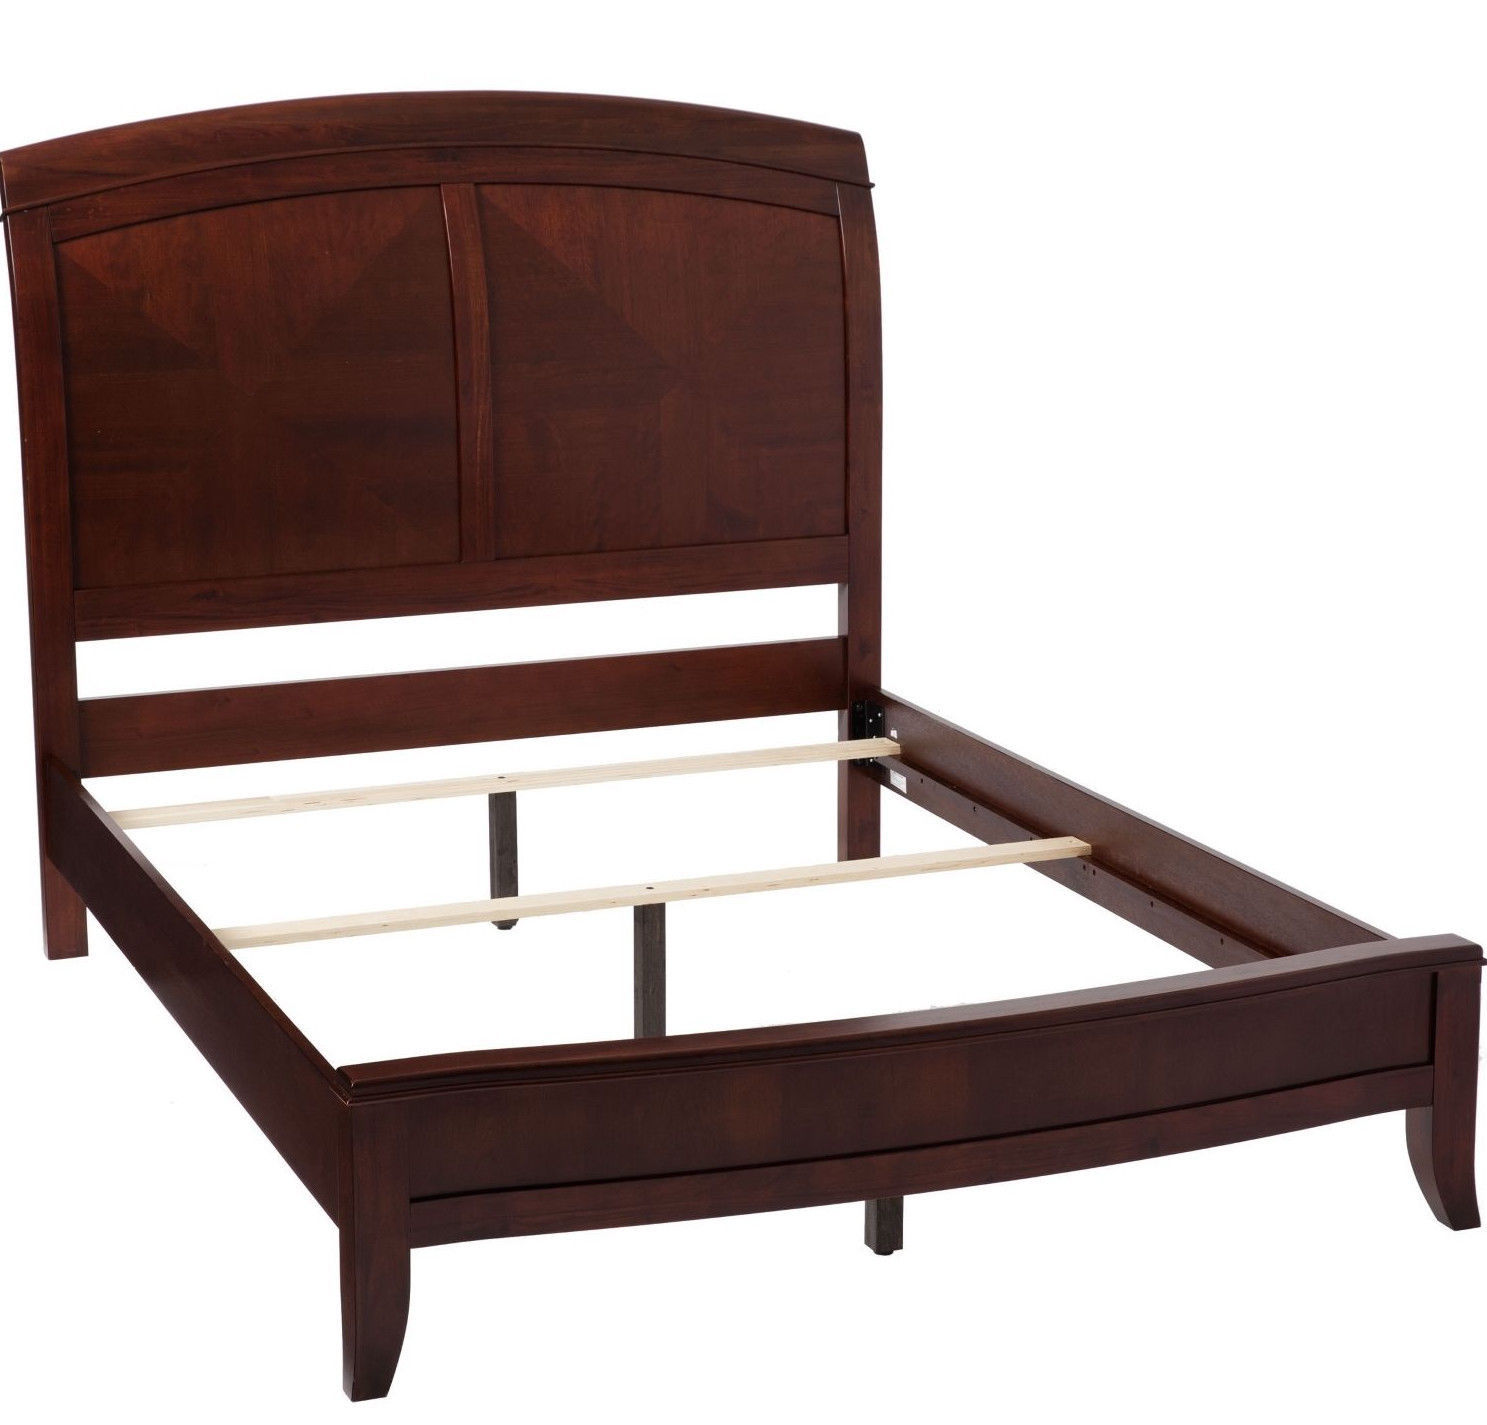 Queen Size Sleigh Bed Frame Wood Mahogany Cherry Veneer Classic Vintage